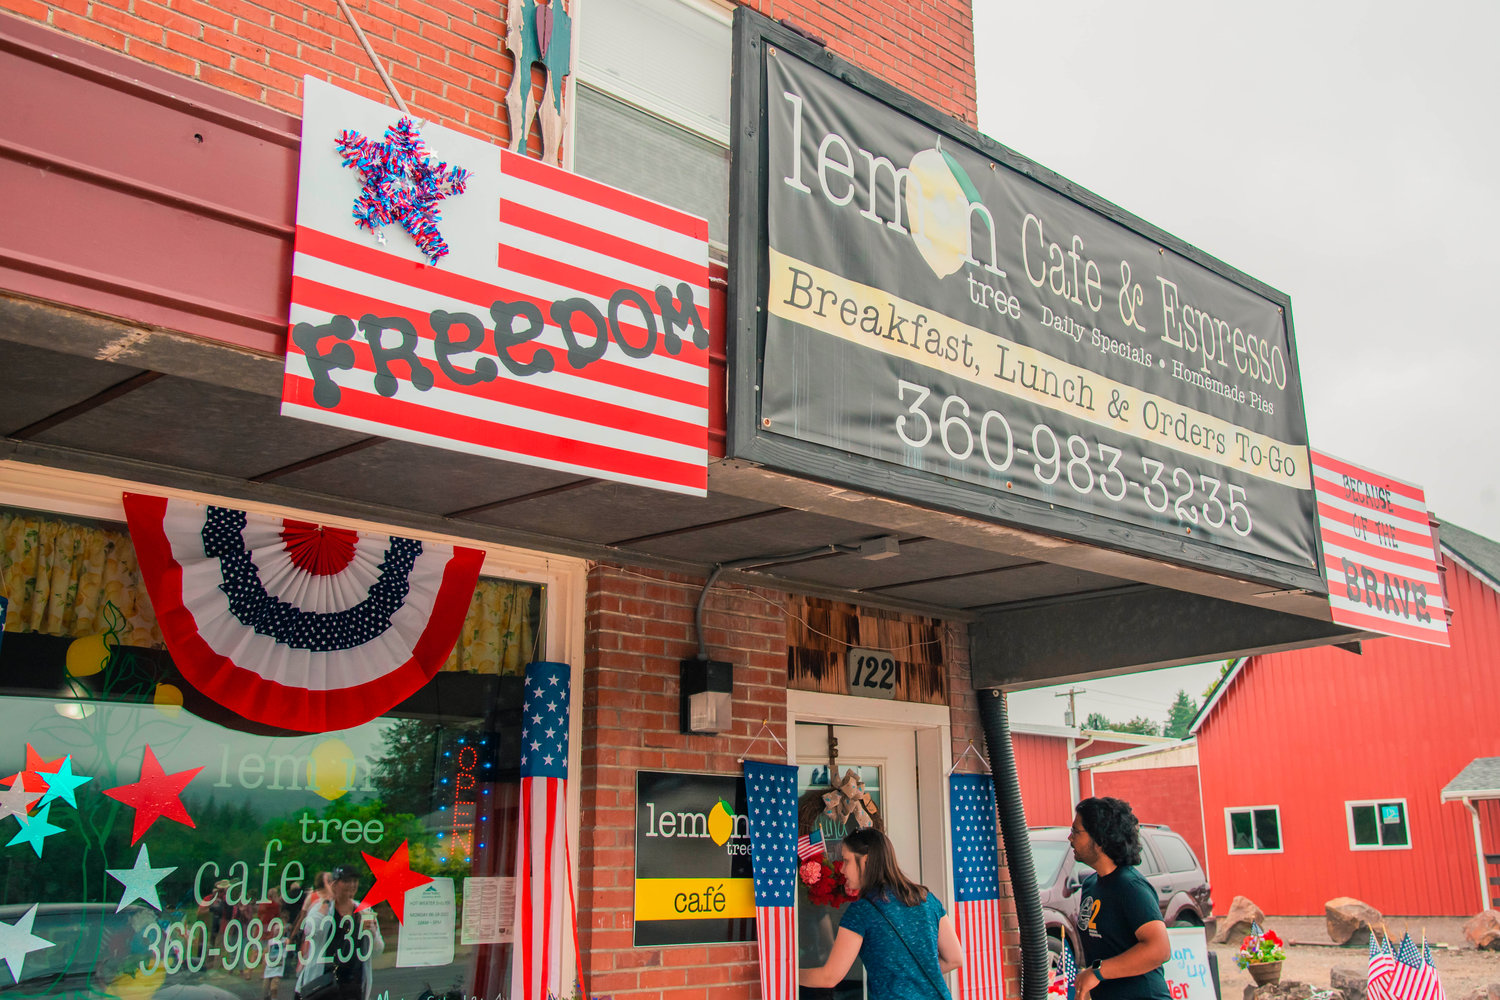 The Lemon Tree Cafe and Espresso was decorated in stars and stripes during the Mossyrock Freedom Festival on Saturday.